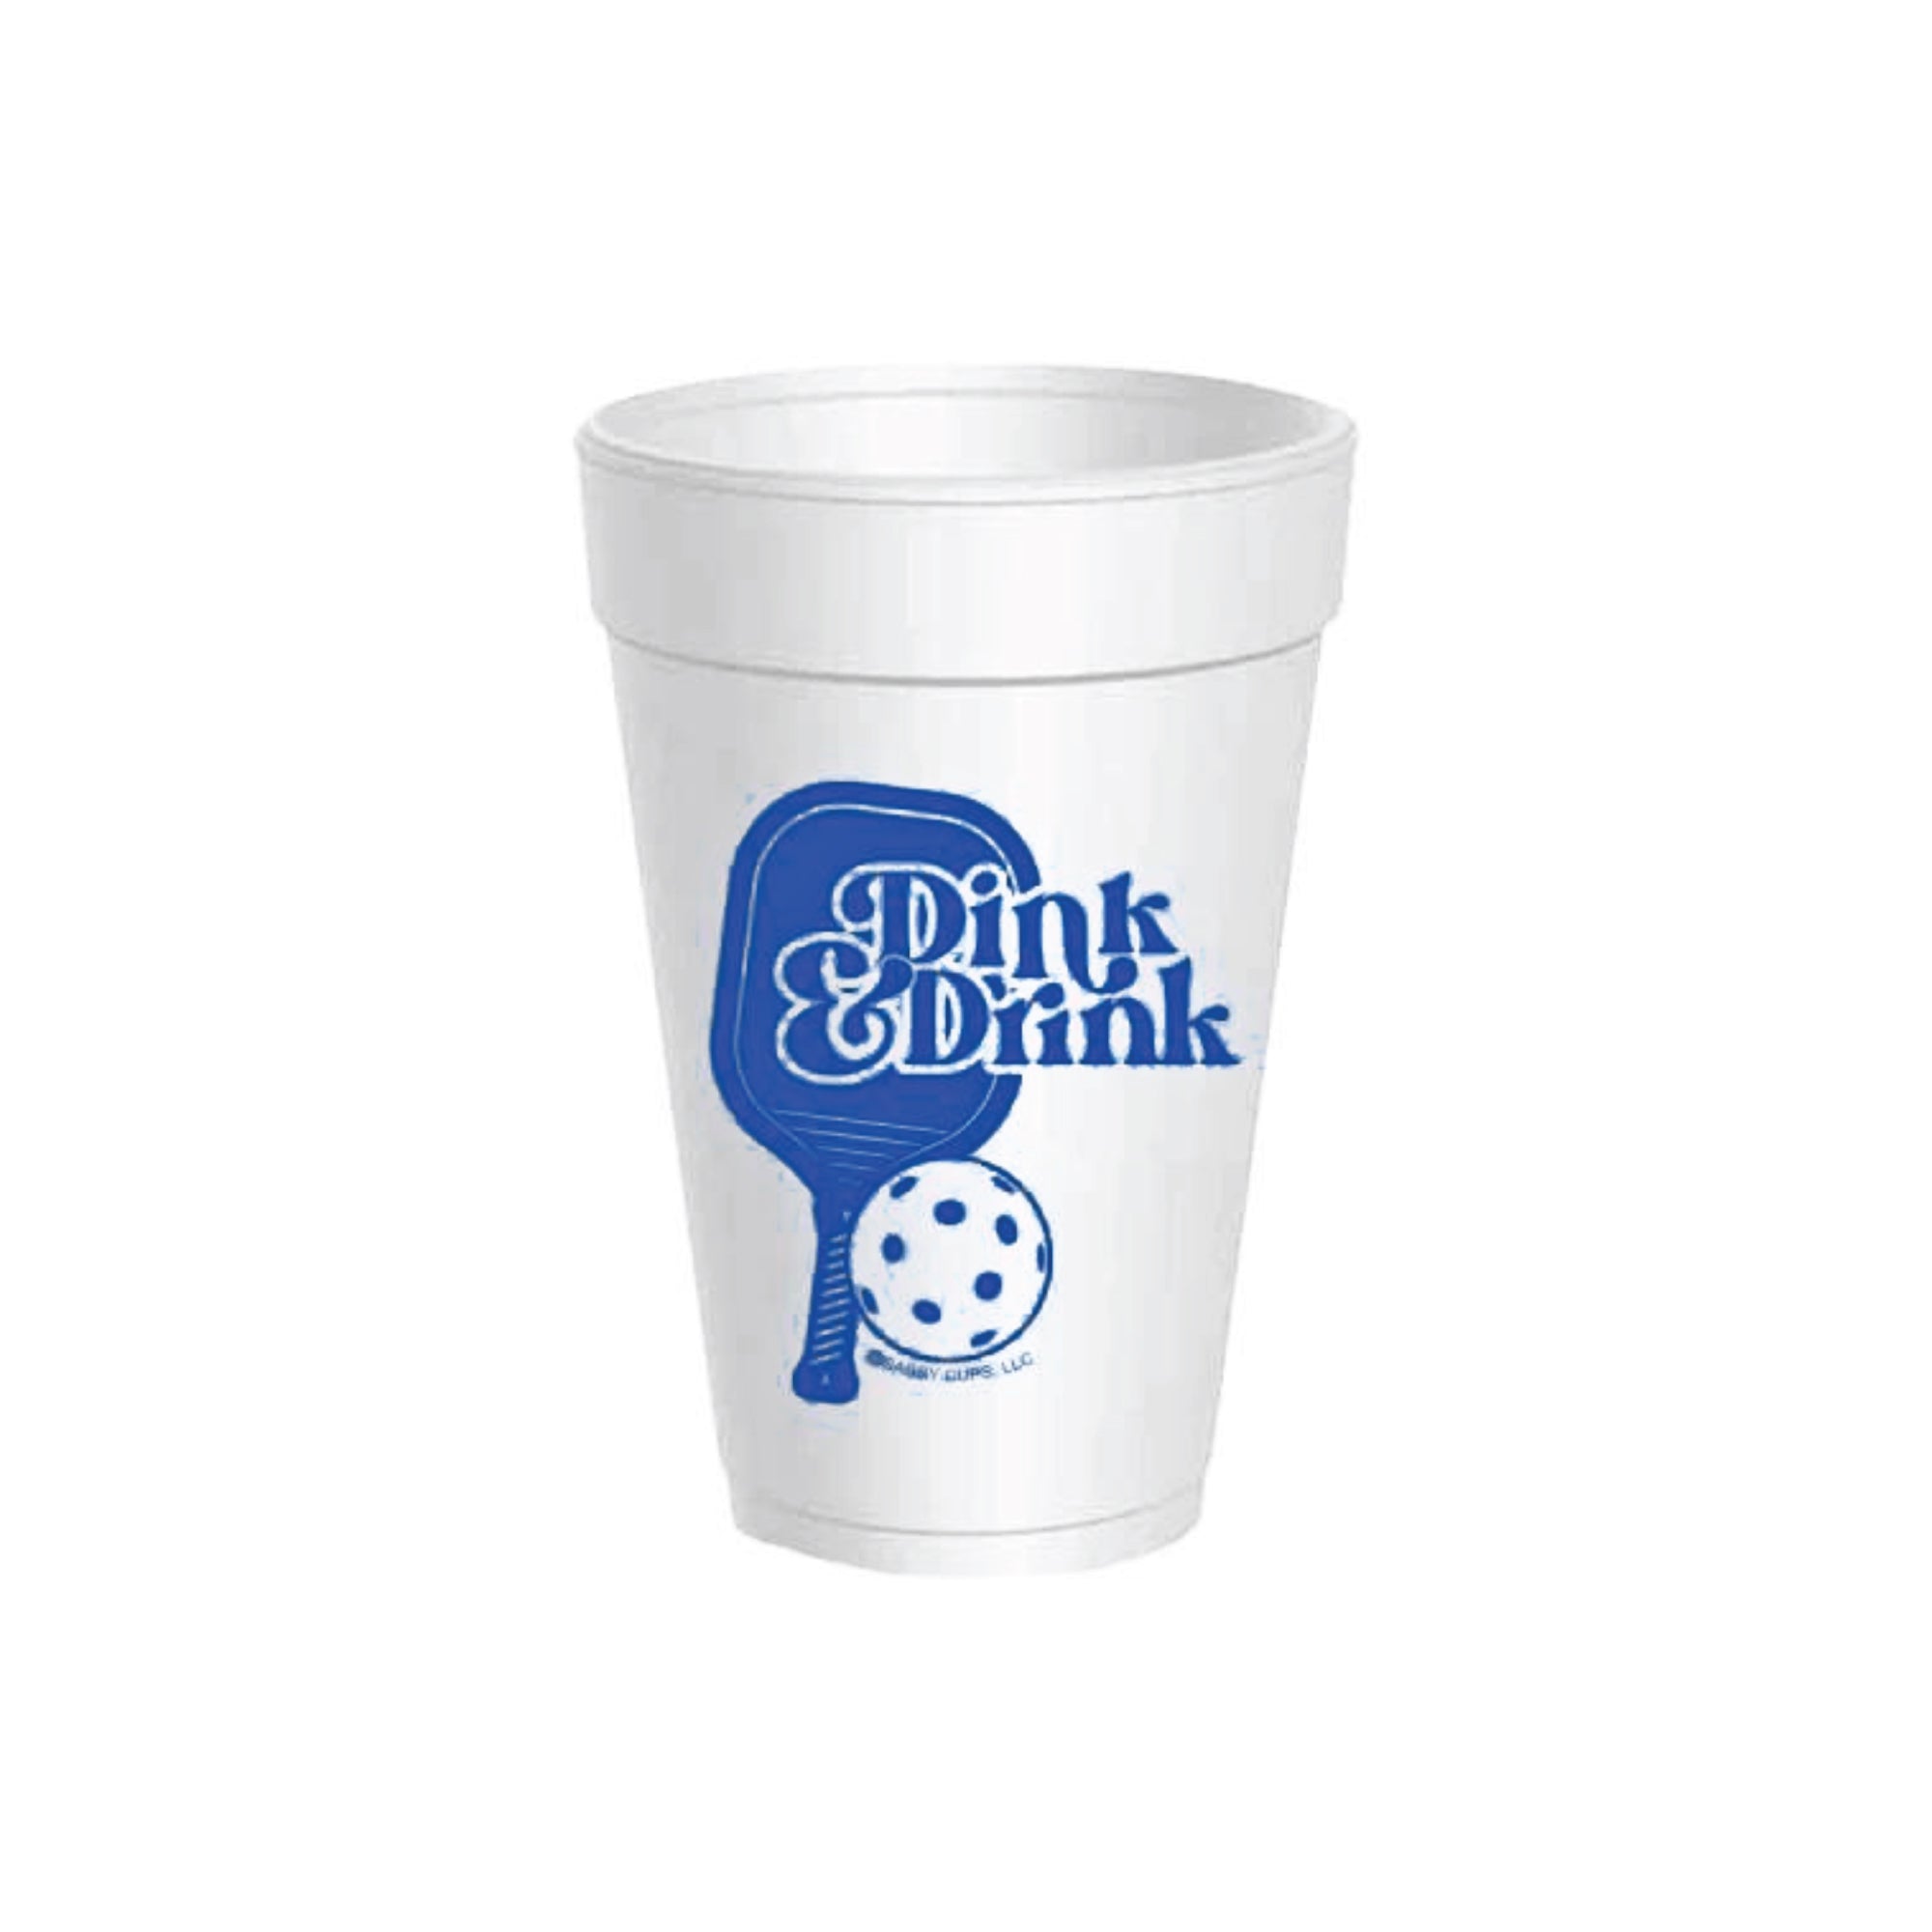 Dink & Drink Pickleball Styrofoam Cups & Lids 10ct | The Party Darling